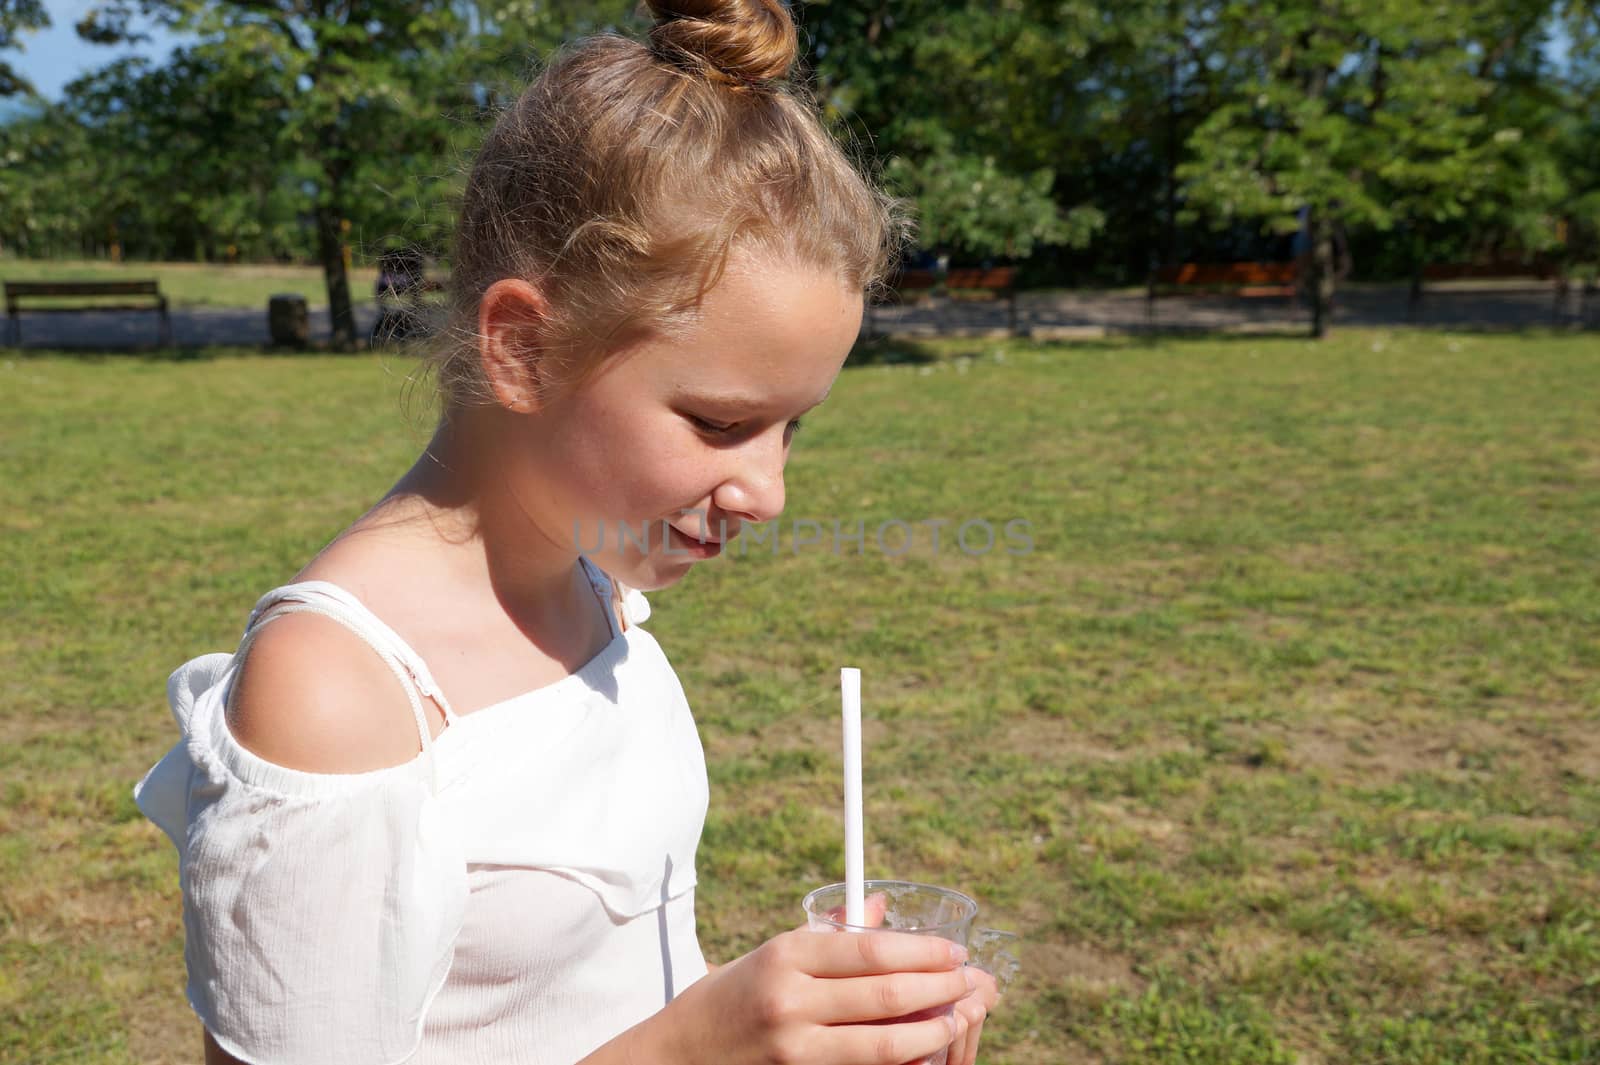 girl drinks fruit juice through a straw in summer park.